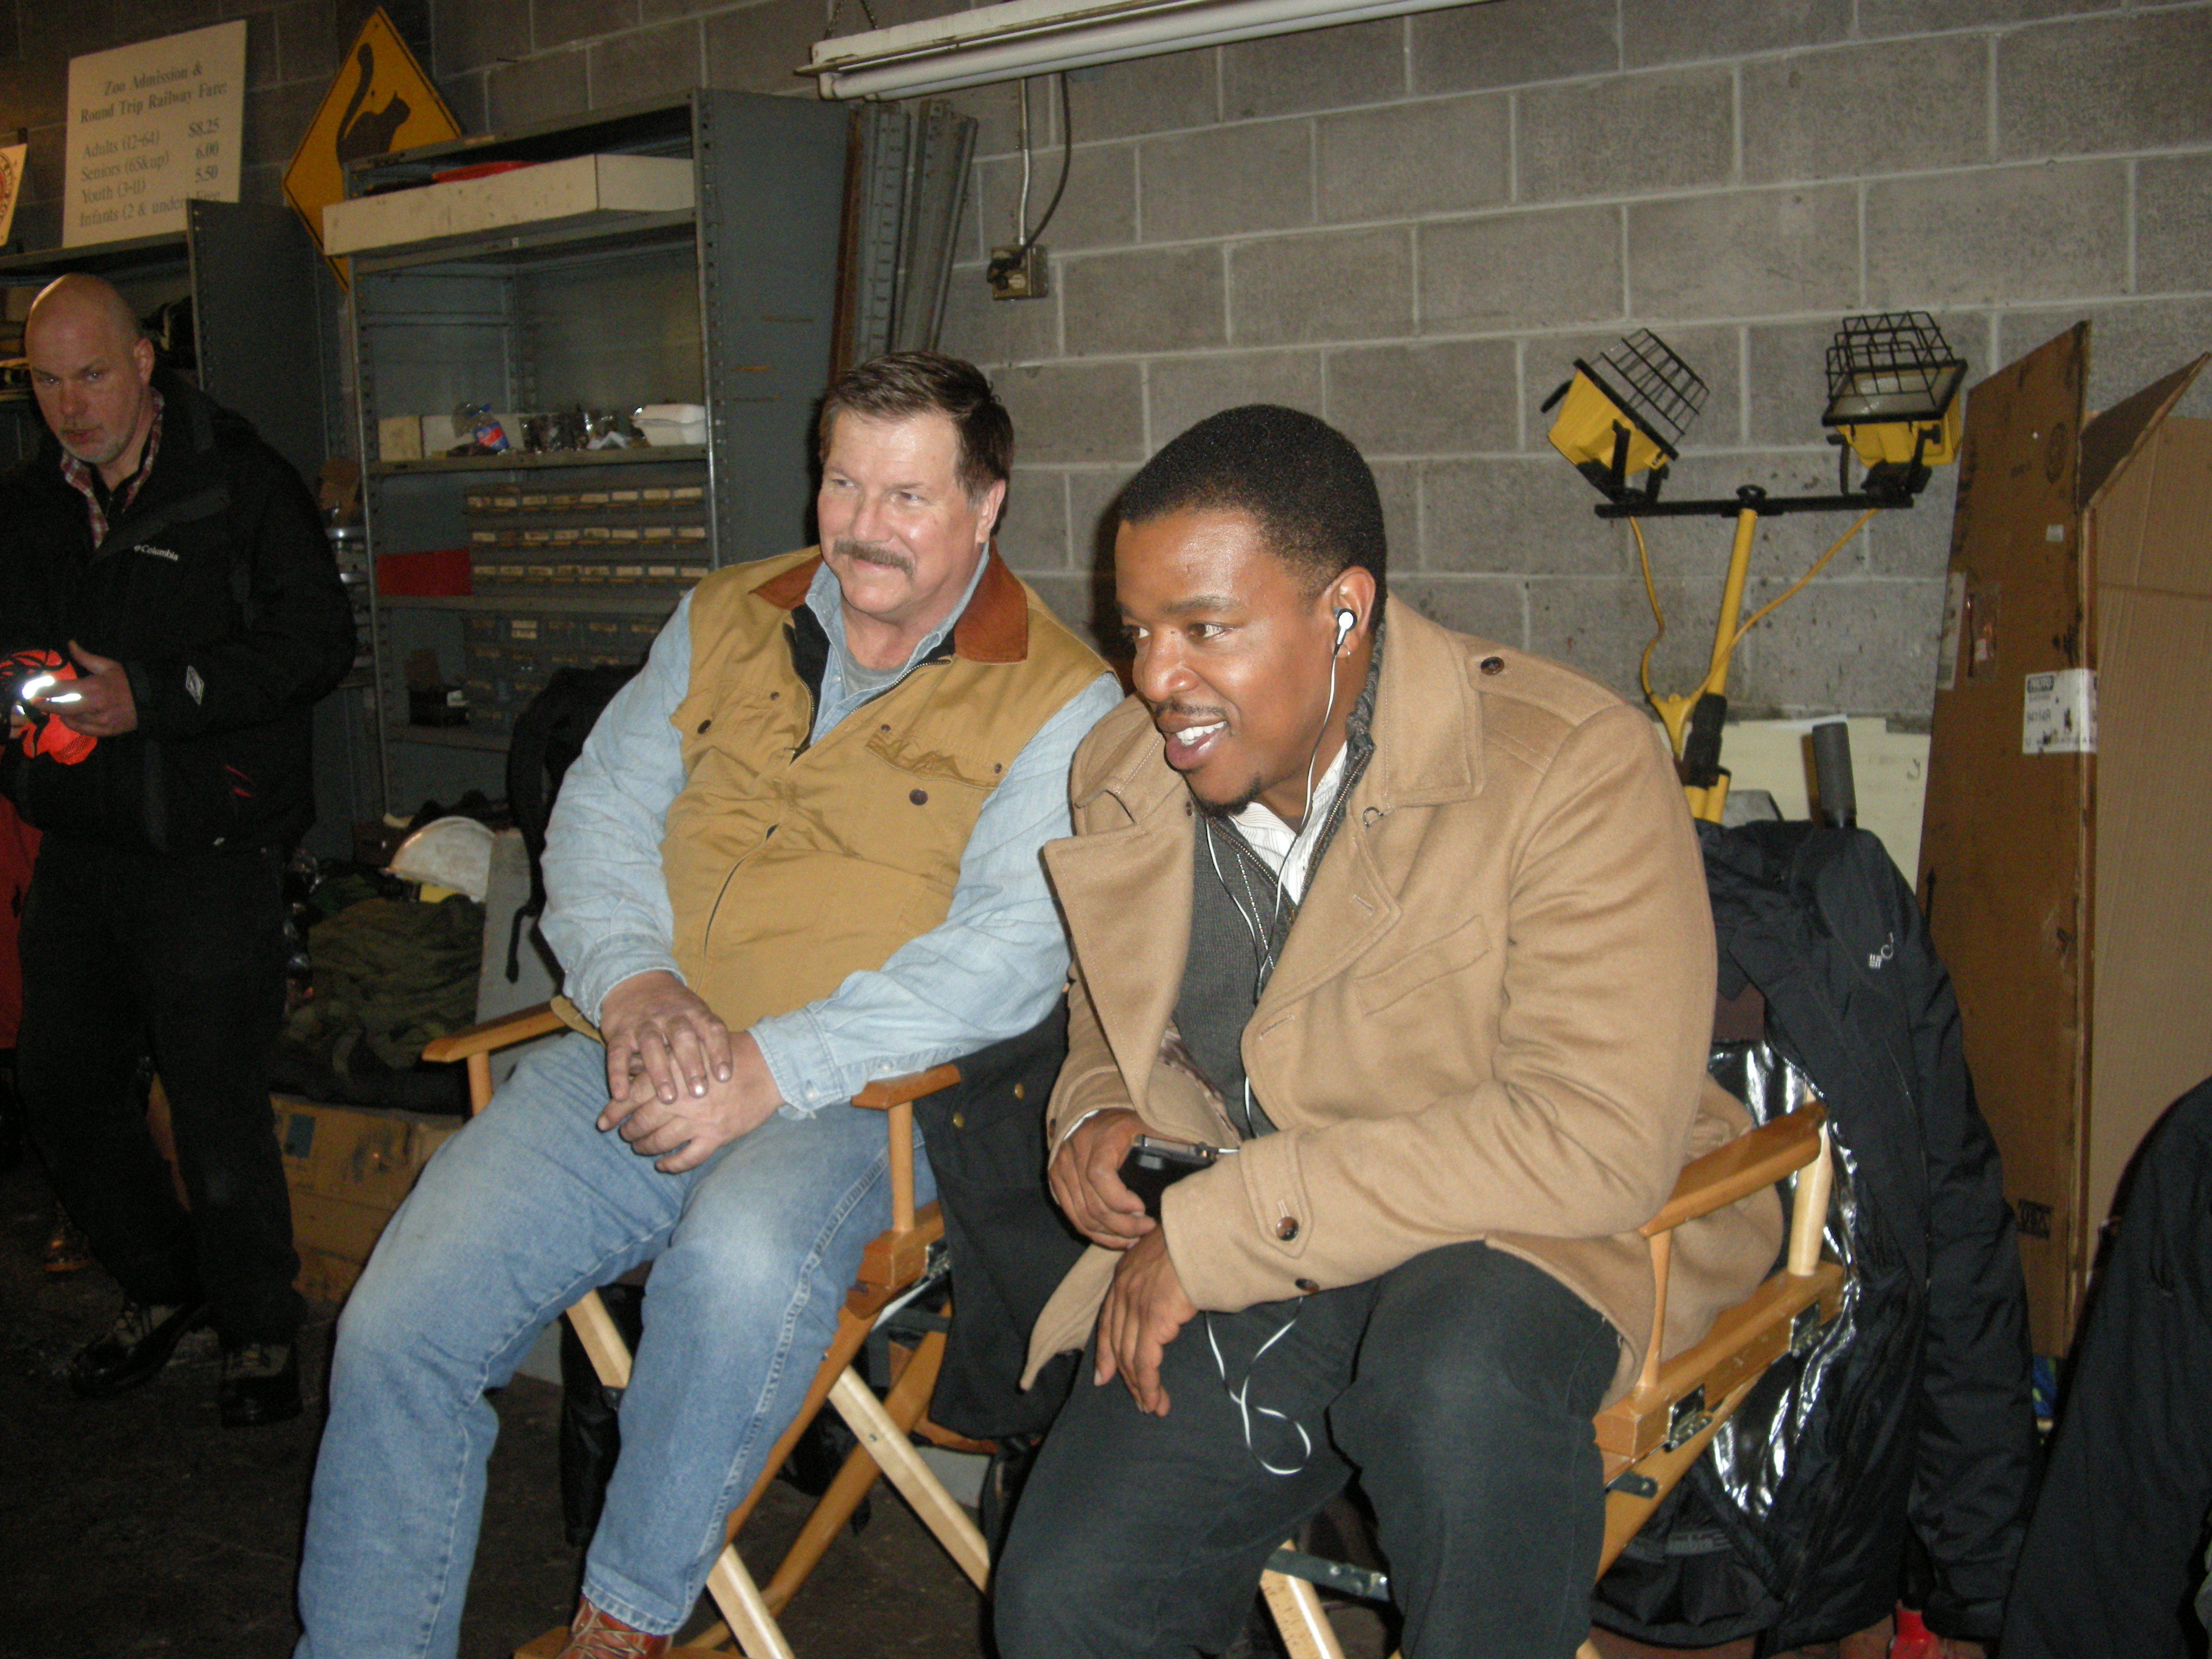 Daniel Knight on set of NBC's GRIMM (with Russell Hornsby)